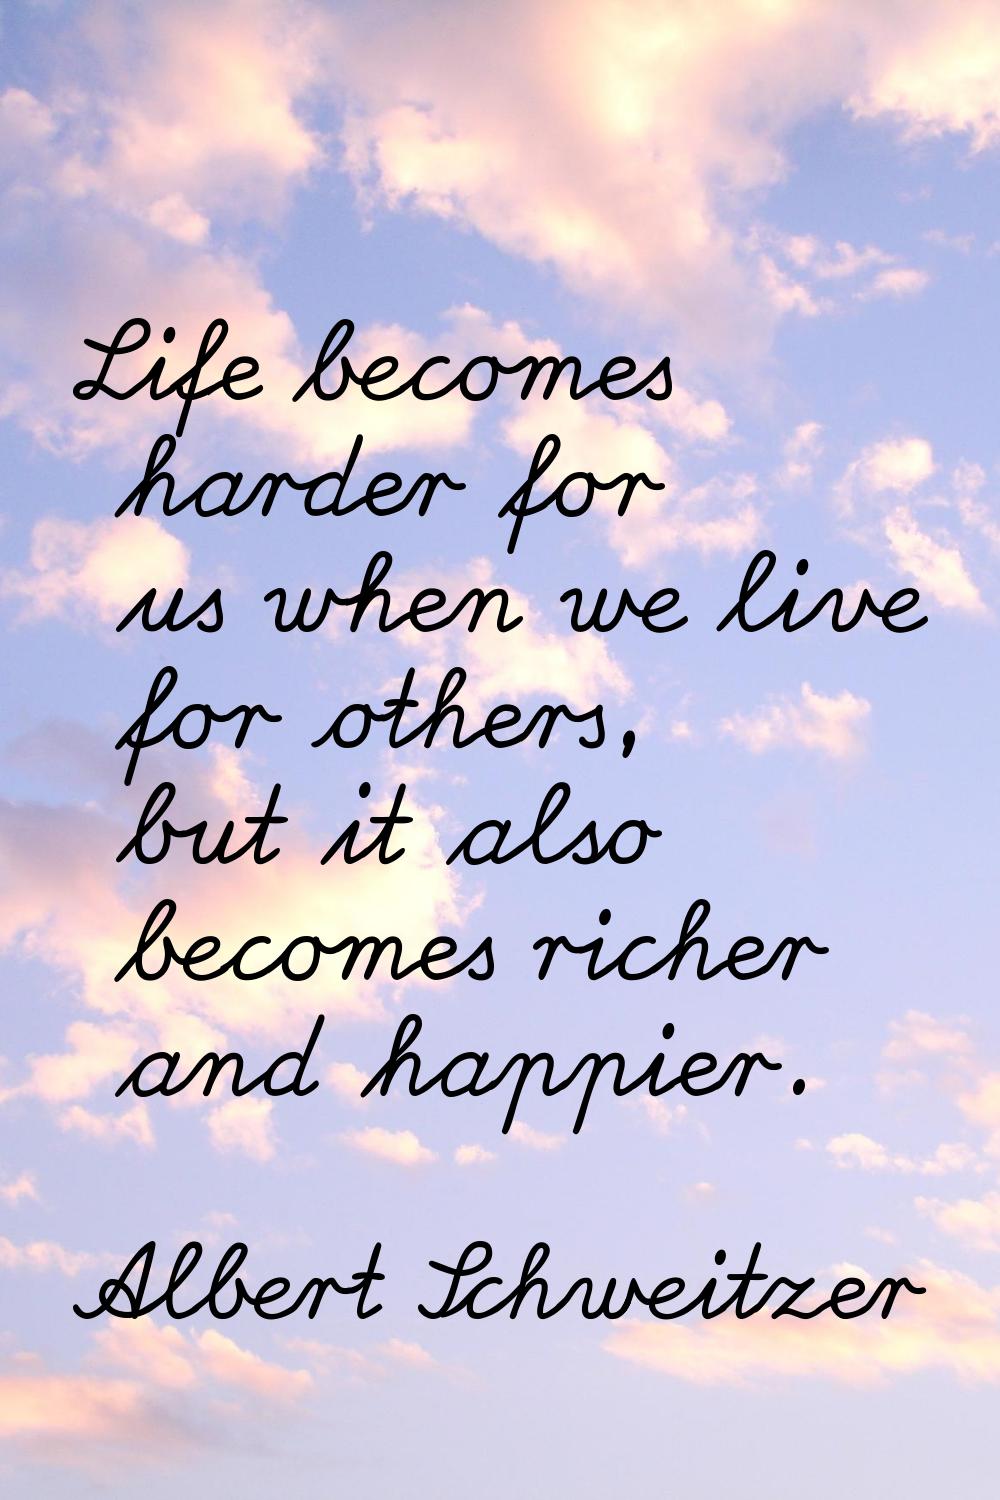 Life becomes harder for us when we live for others, but it also becomes richer and happier.